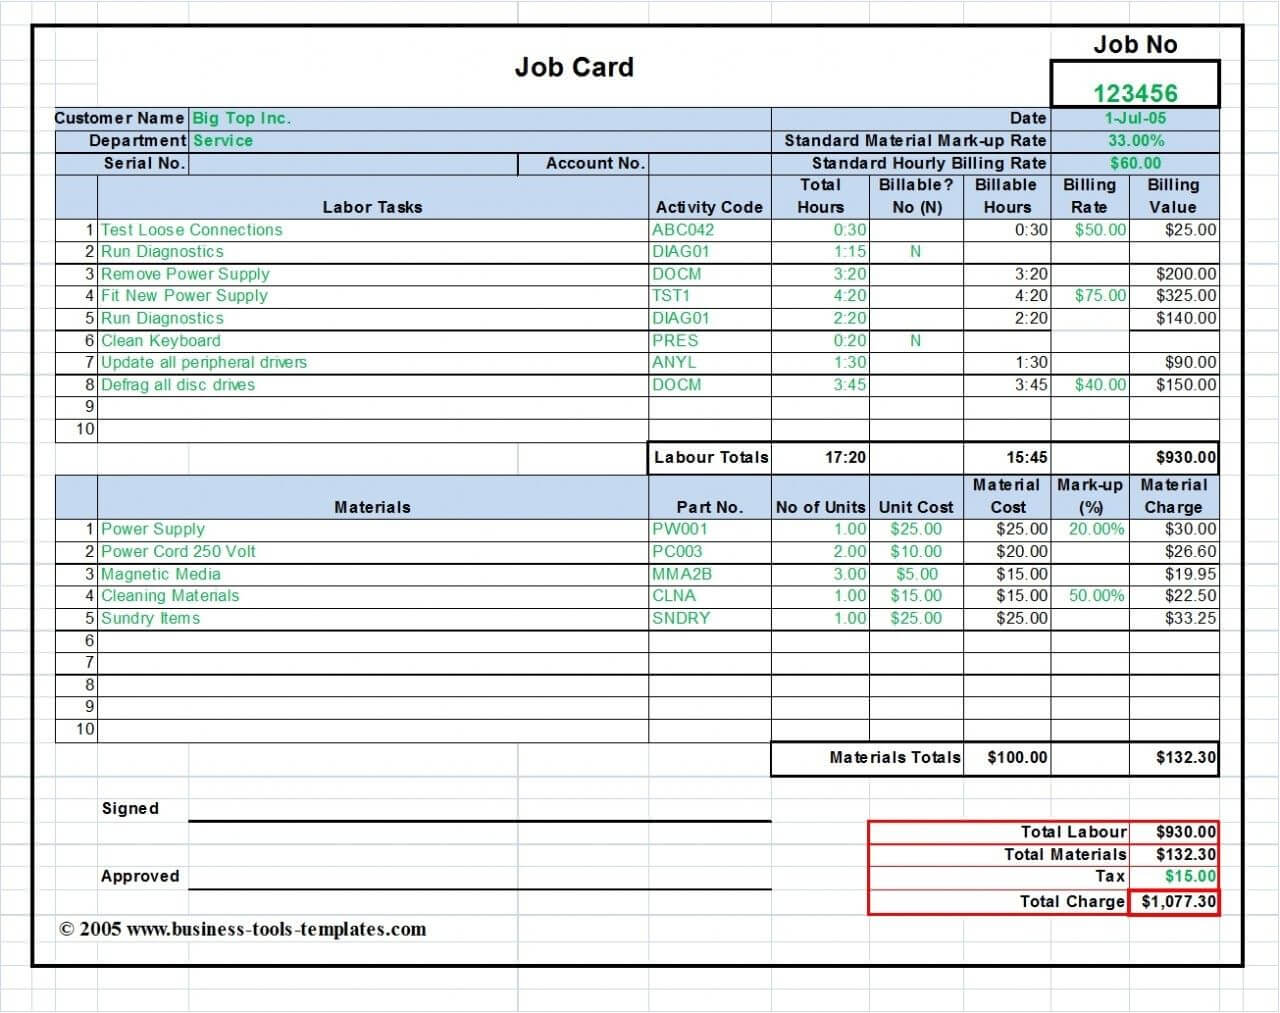 Workshop Job Card Template Excel, Labor & Material Cost For Job Card Template Mechanic